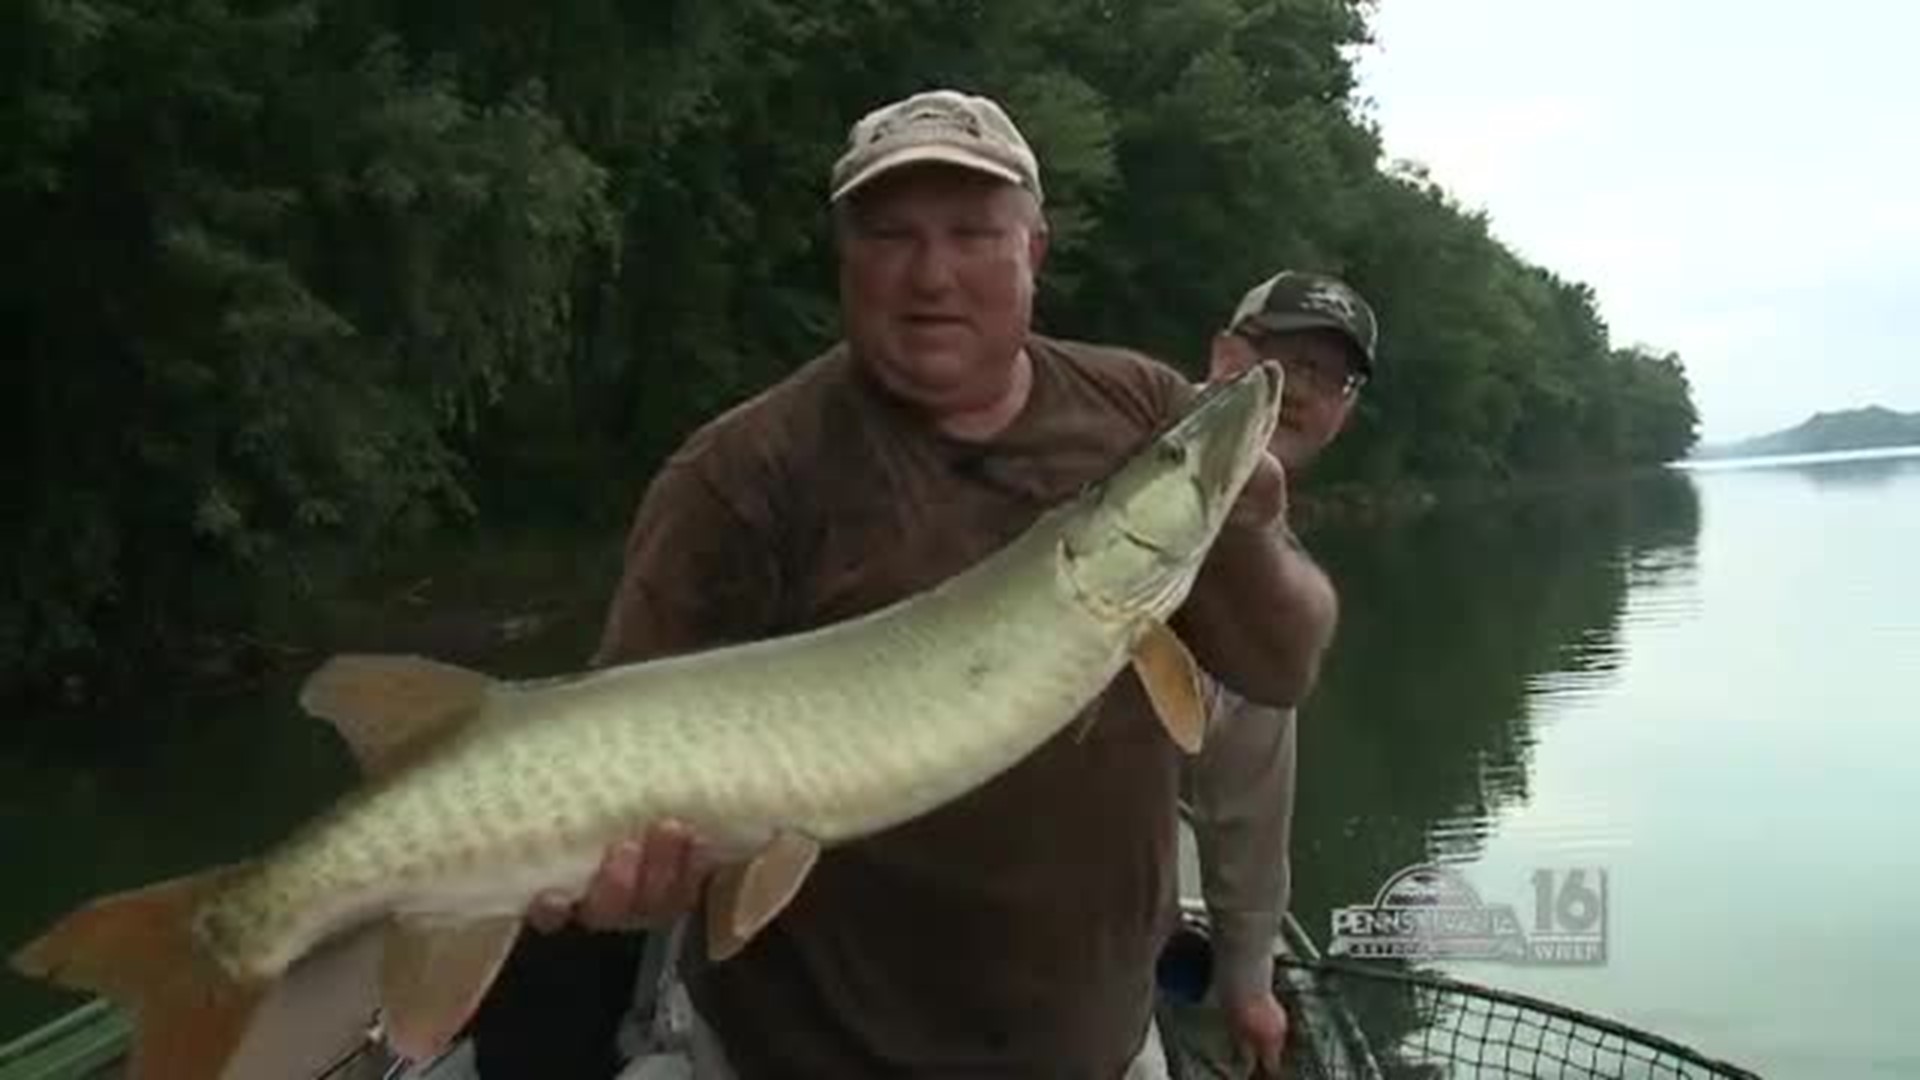 Hooked up with a Muskie on the Suskie